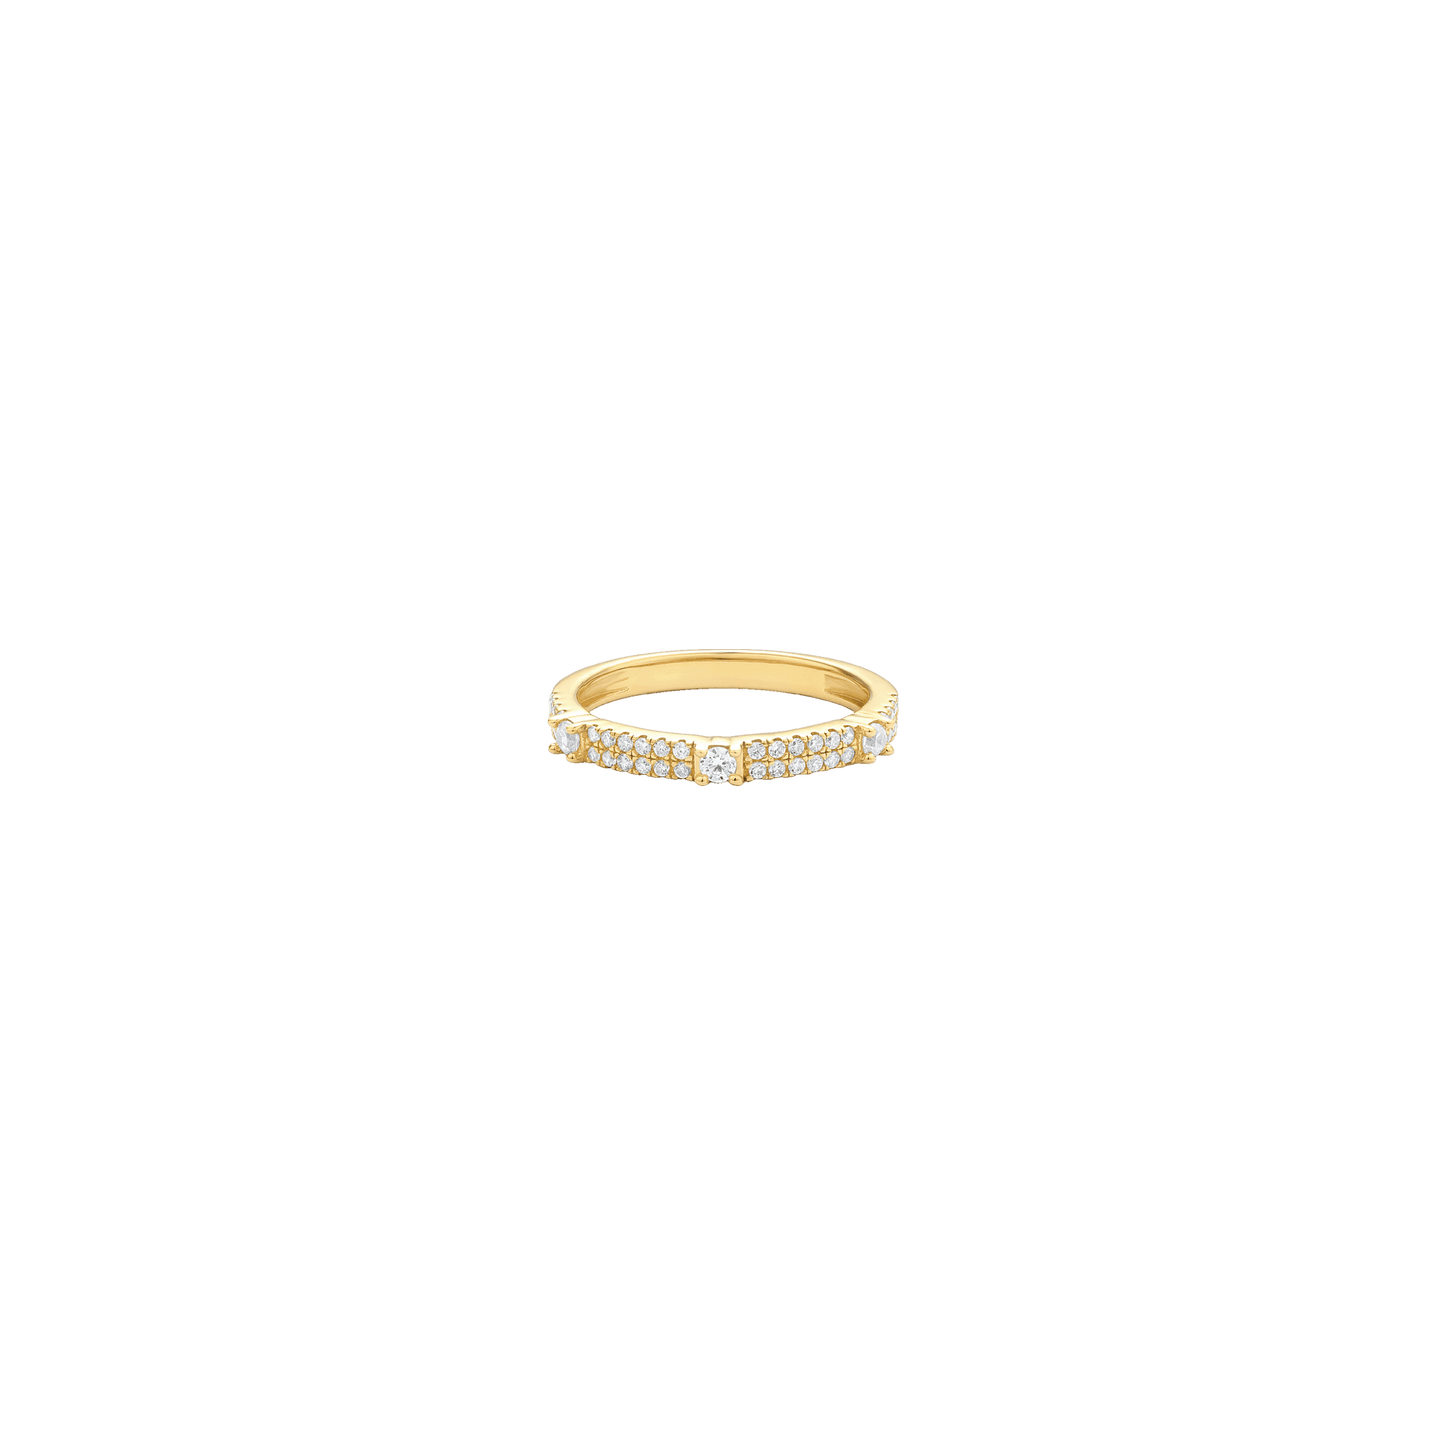 Trilogy Diamond Eternity Ring - 14K Yellow Gold Rings 14K Solid Gold US 4 